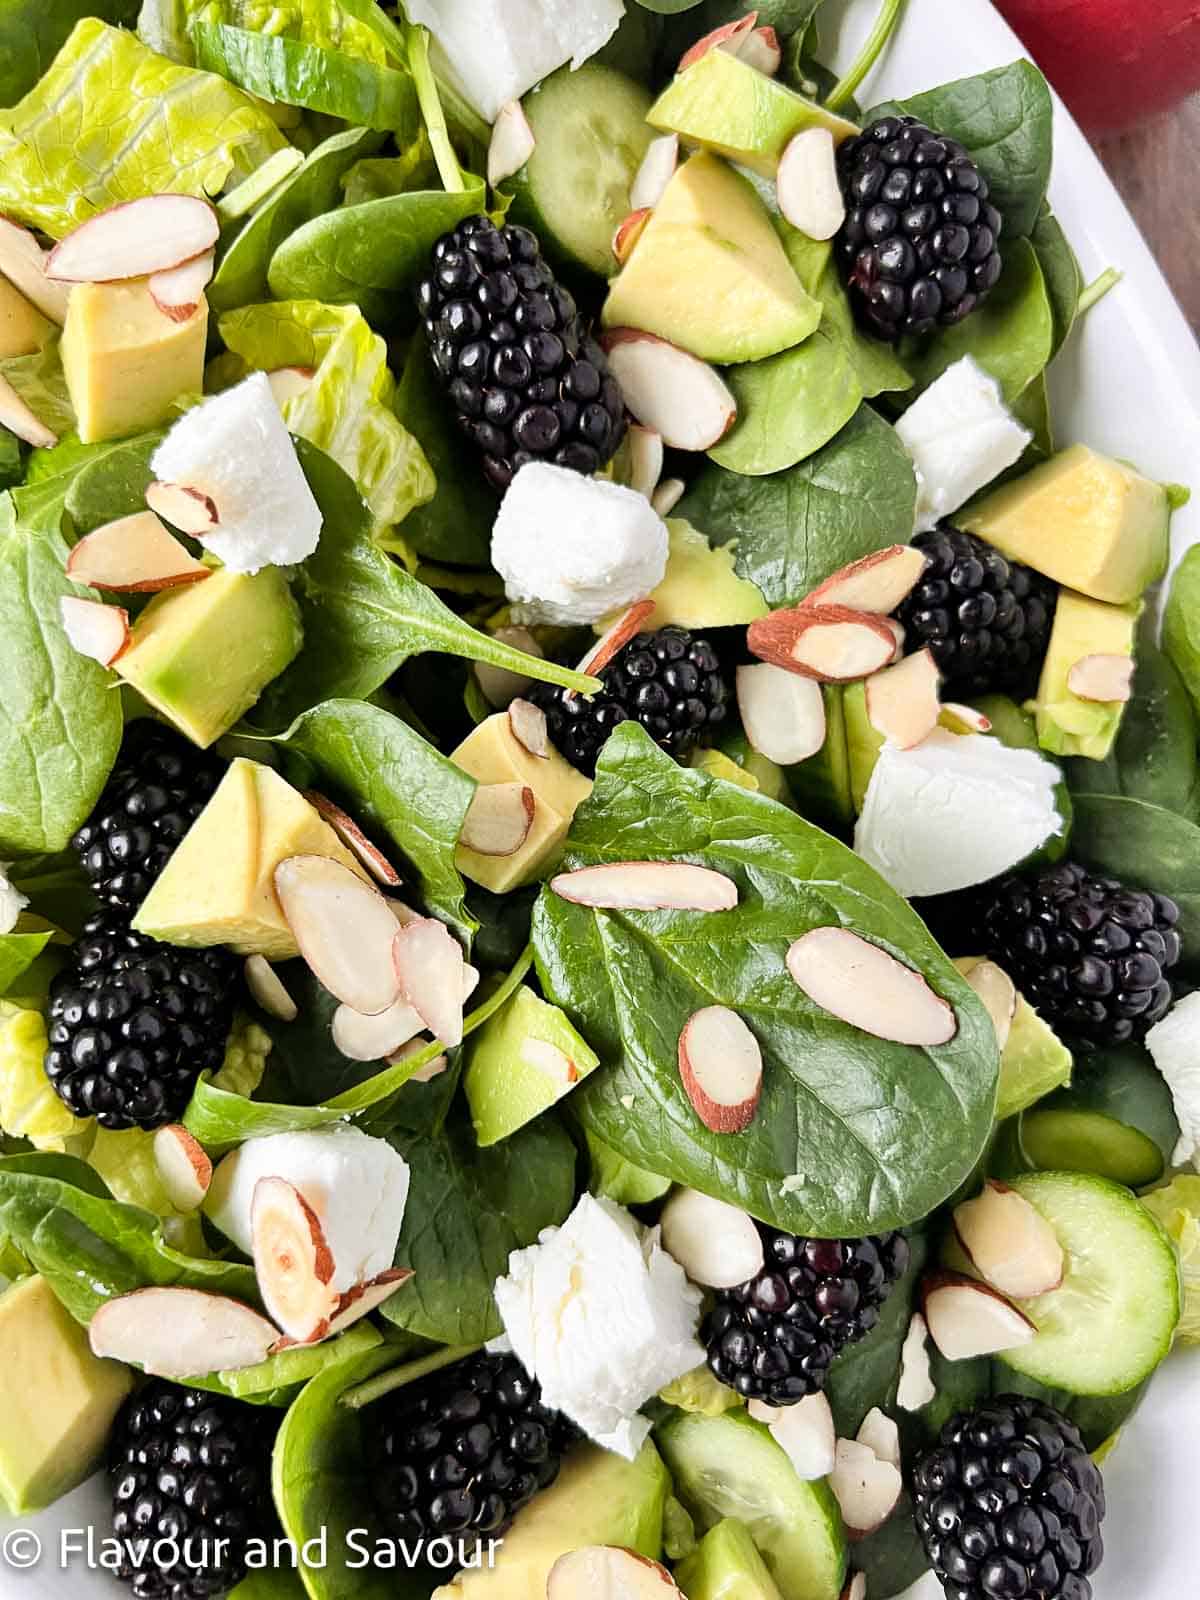 Fresh blackberries, goat cheese, cucumber slices and avocado cubes on a bed of spinach and romaine.